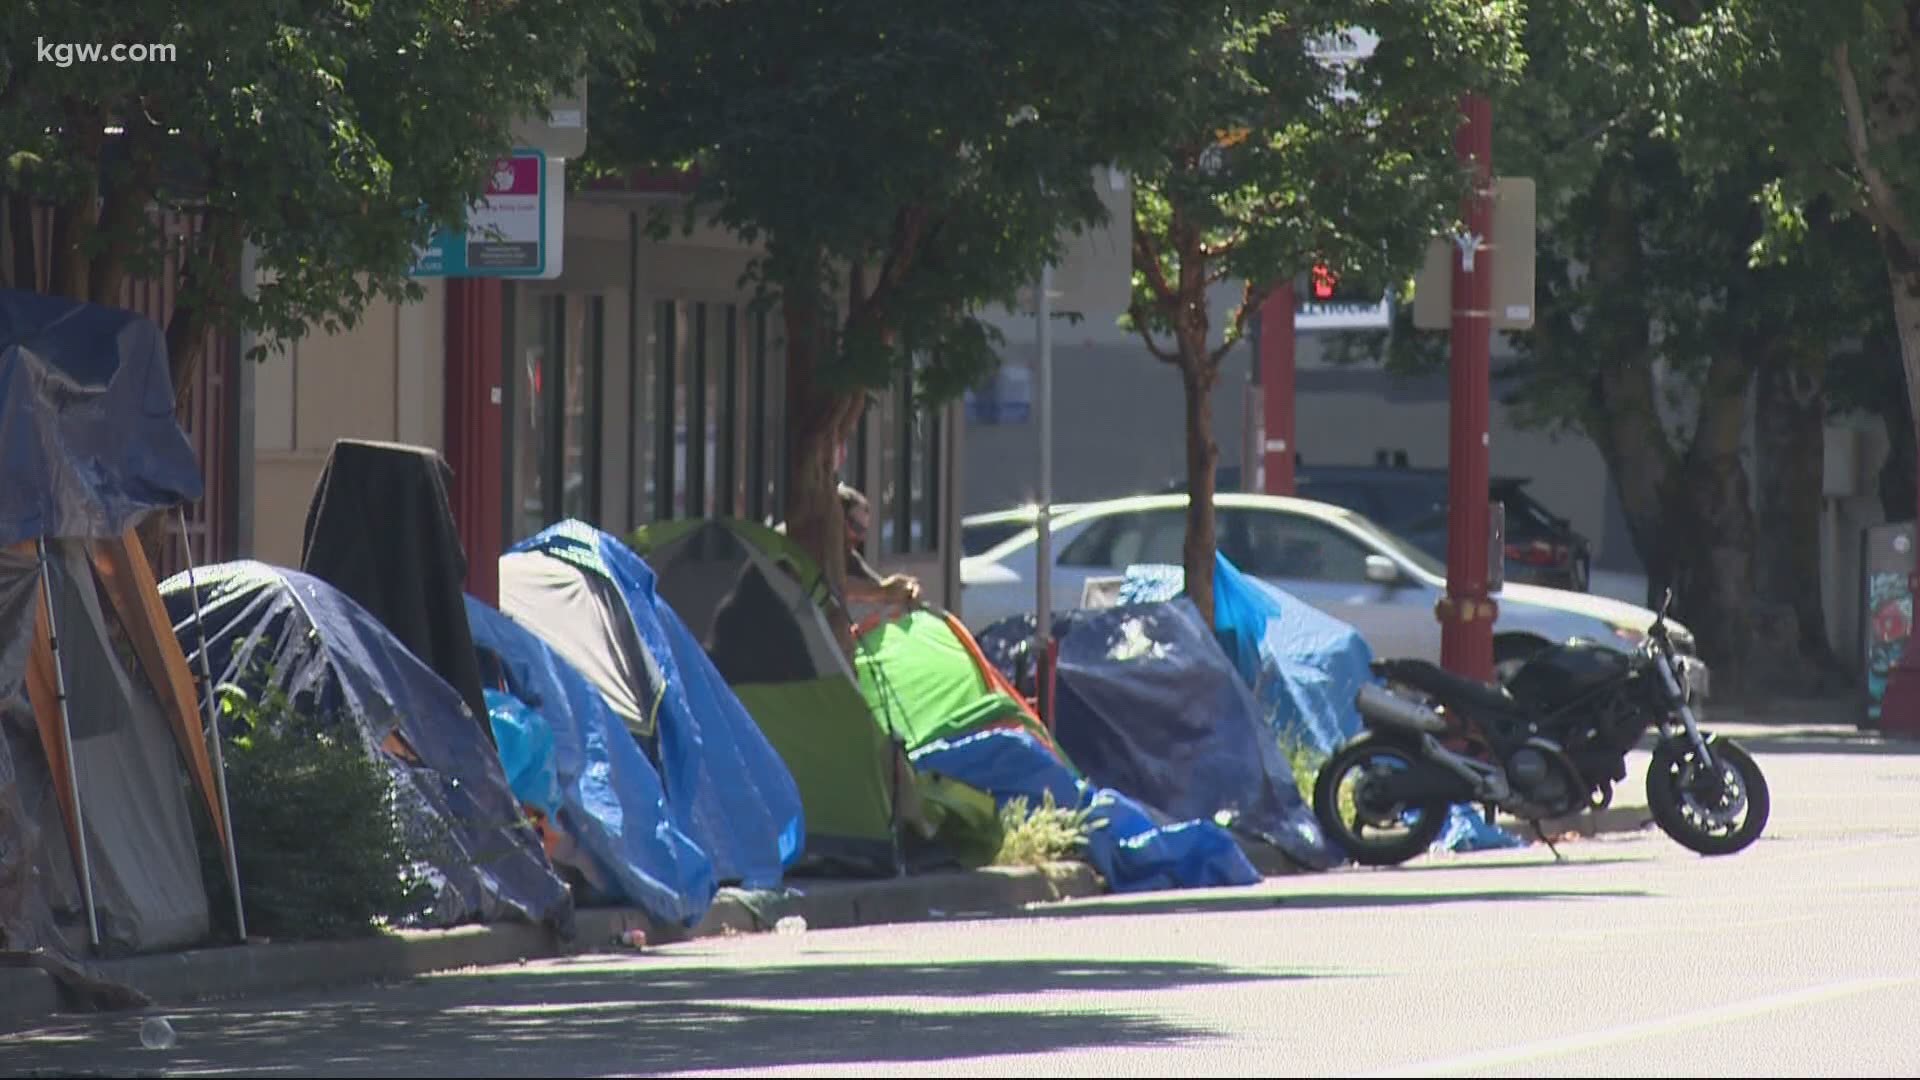 A national study said the pandemic could result in a 40-45% in homelessness nationwide. What will that mean for Portland?